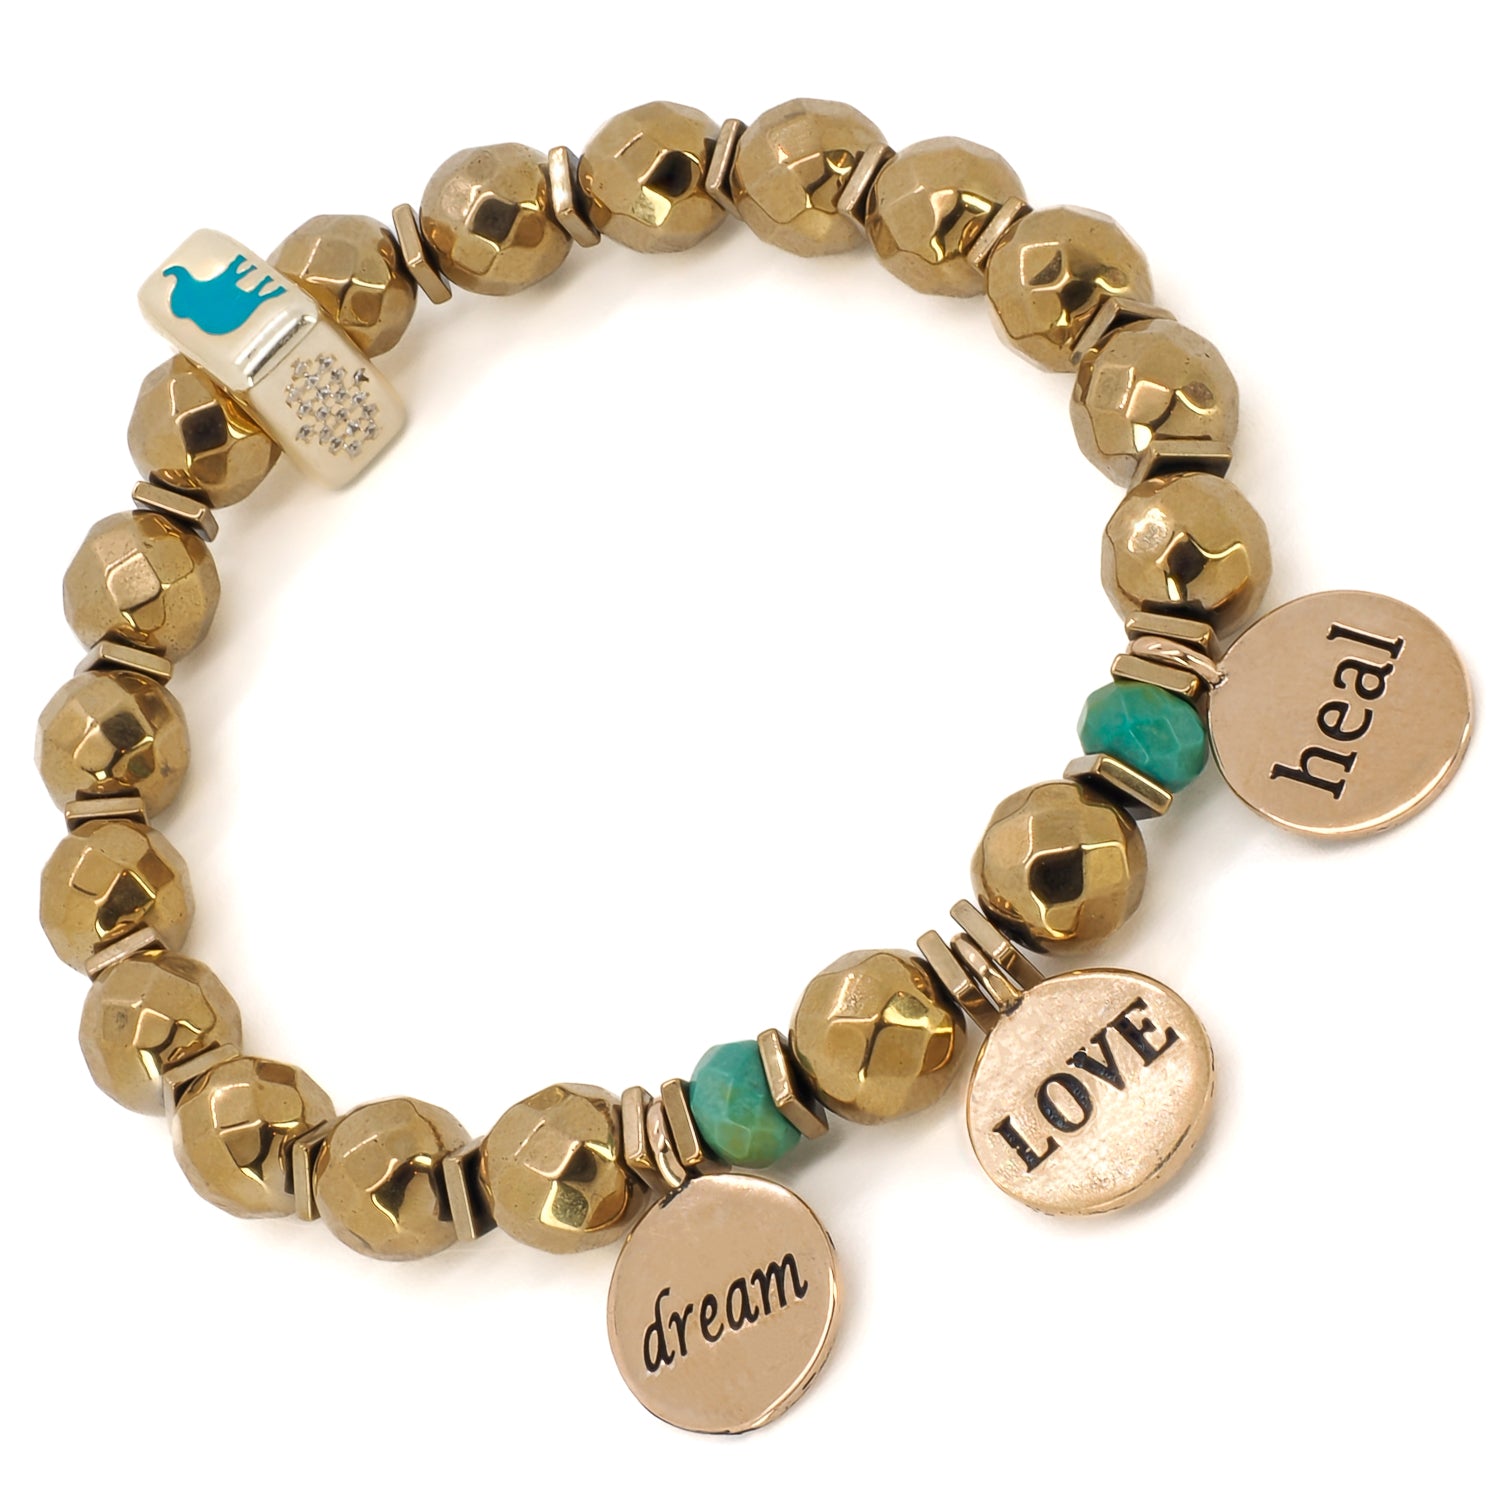 This bracelet serves as a powerful reminder to stay positive and hopeful, with a touch of good luck and protection.